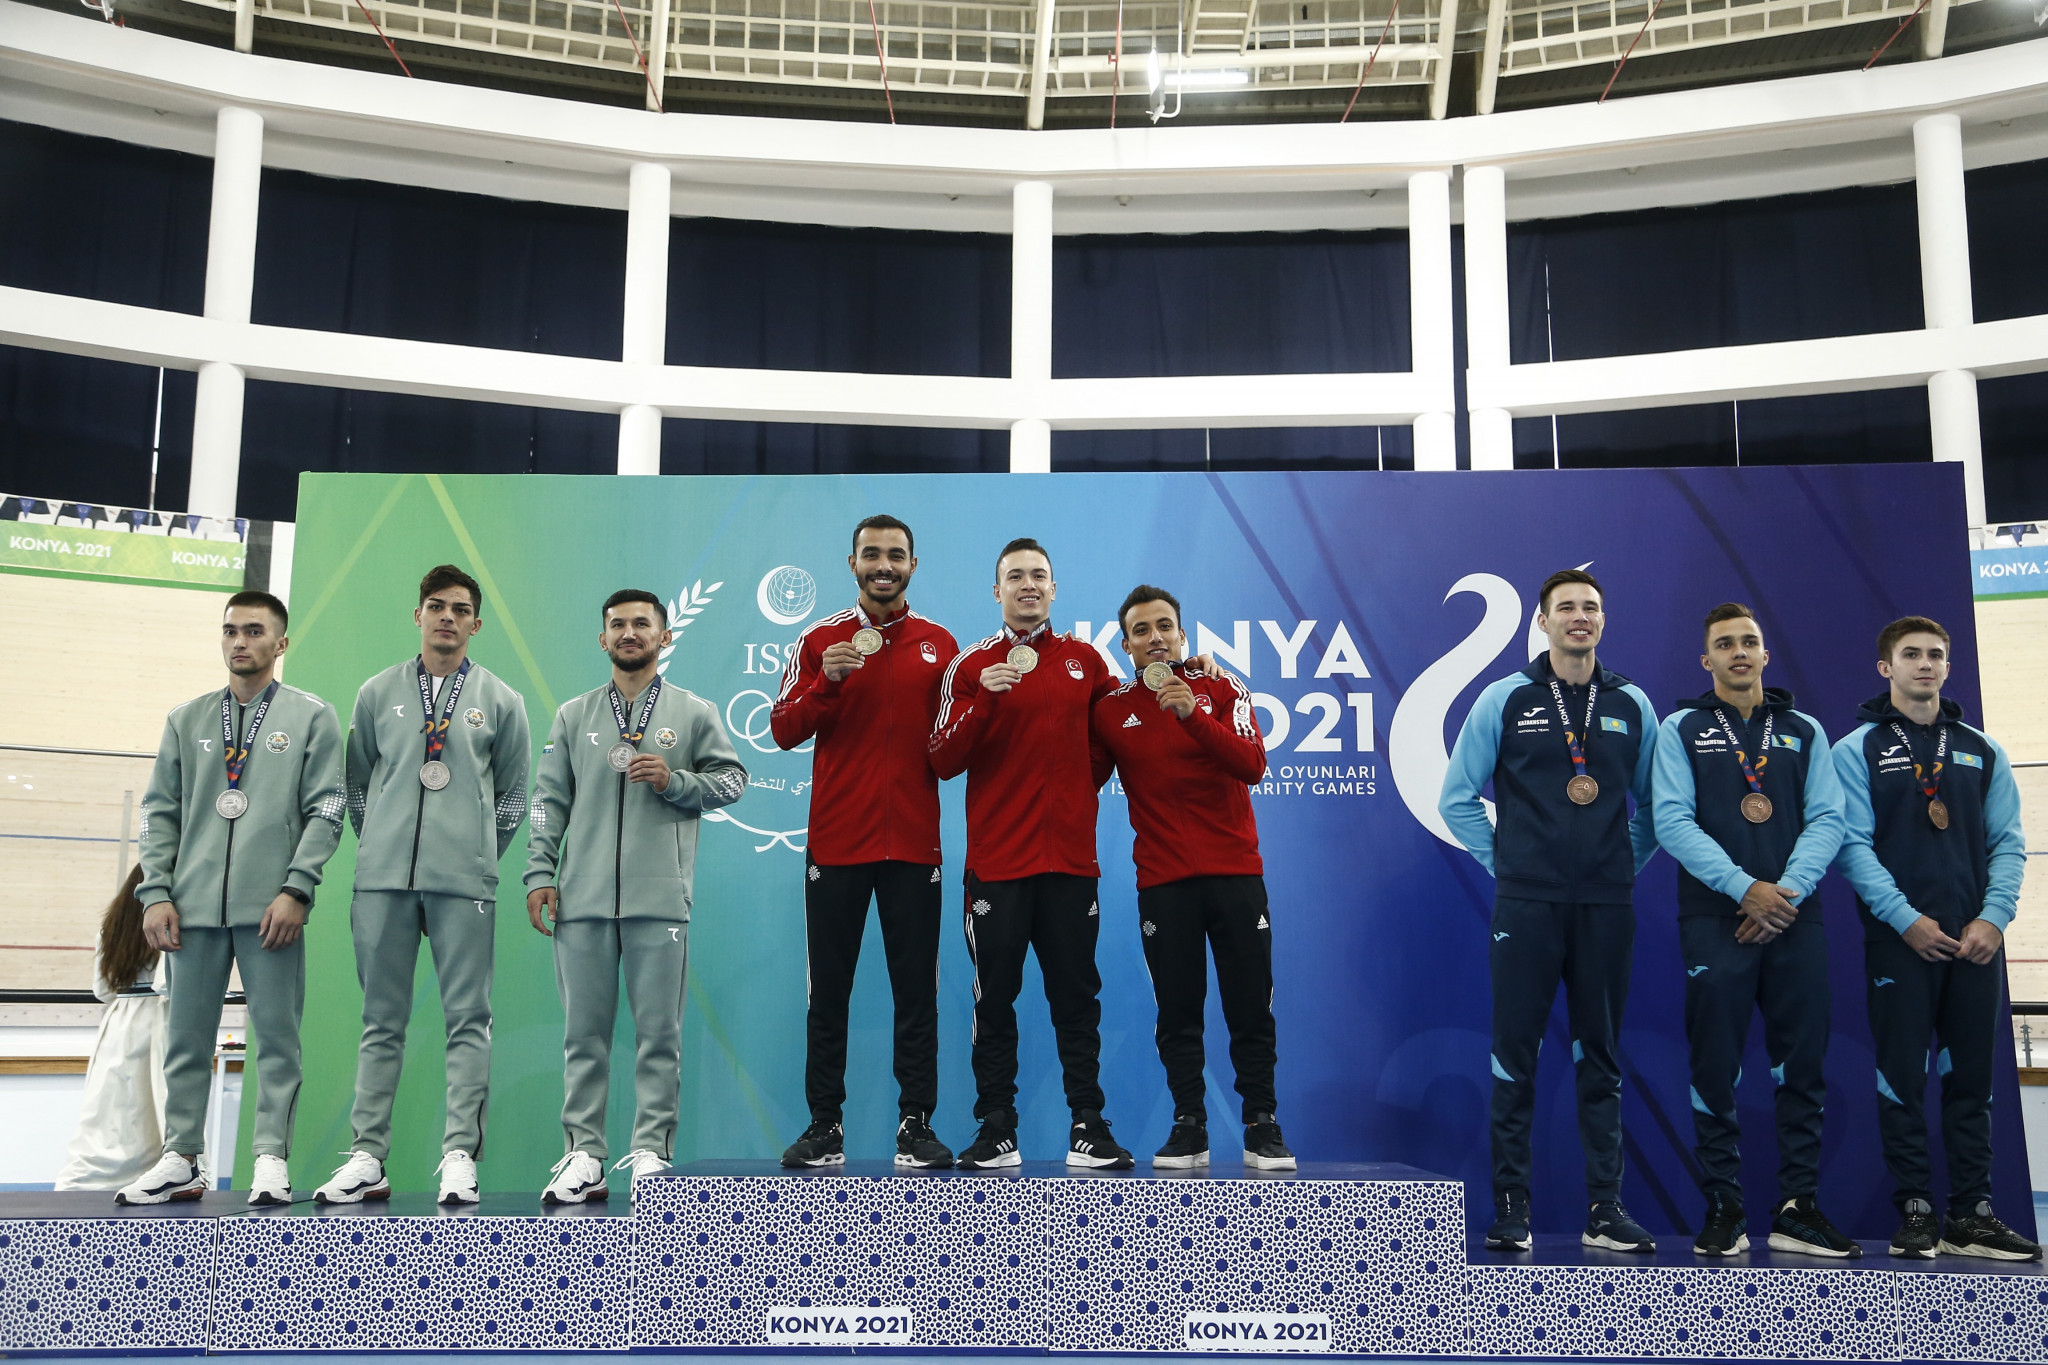 Turkey retained the men's gymnastics team final thanks to the performances of Adem Asil, Ferhat Arican and Ahmet Onder  ©Konya2021